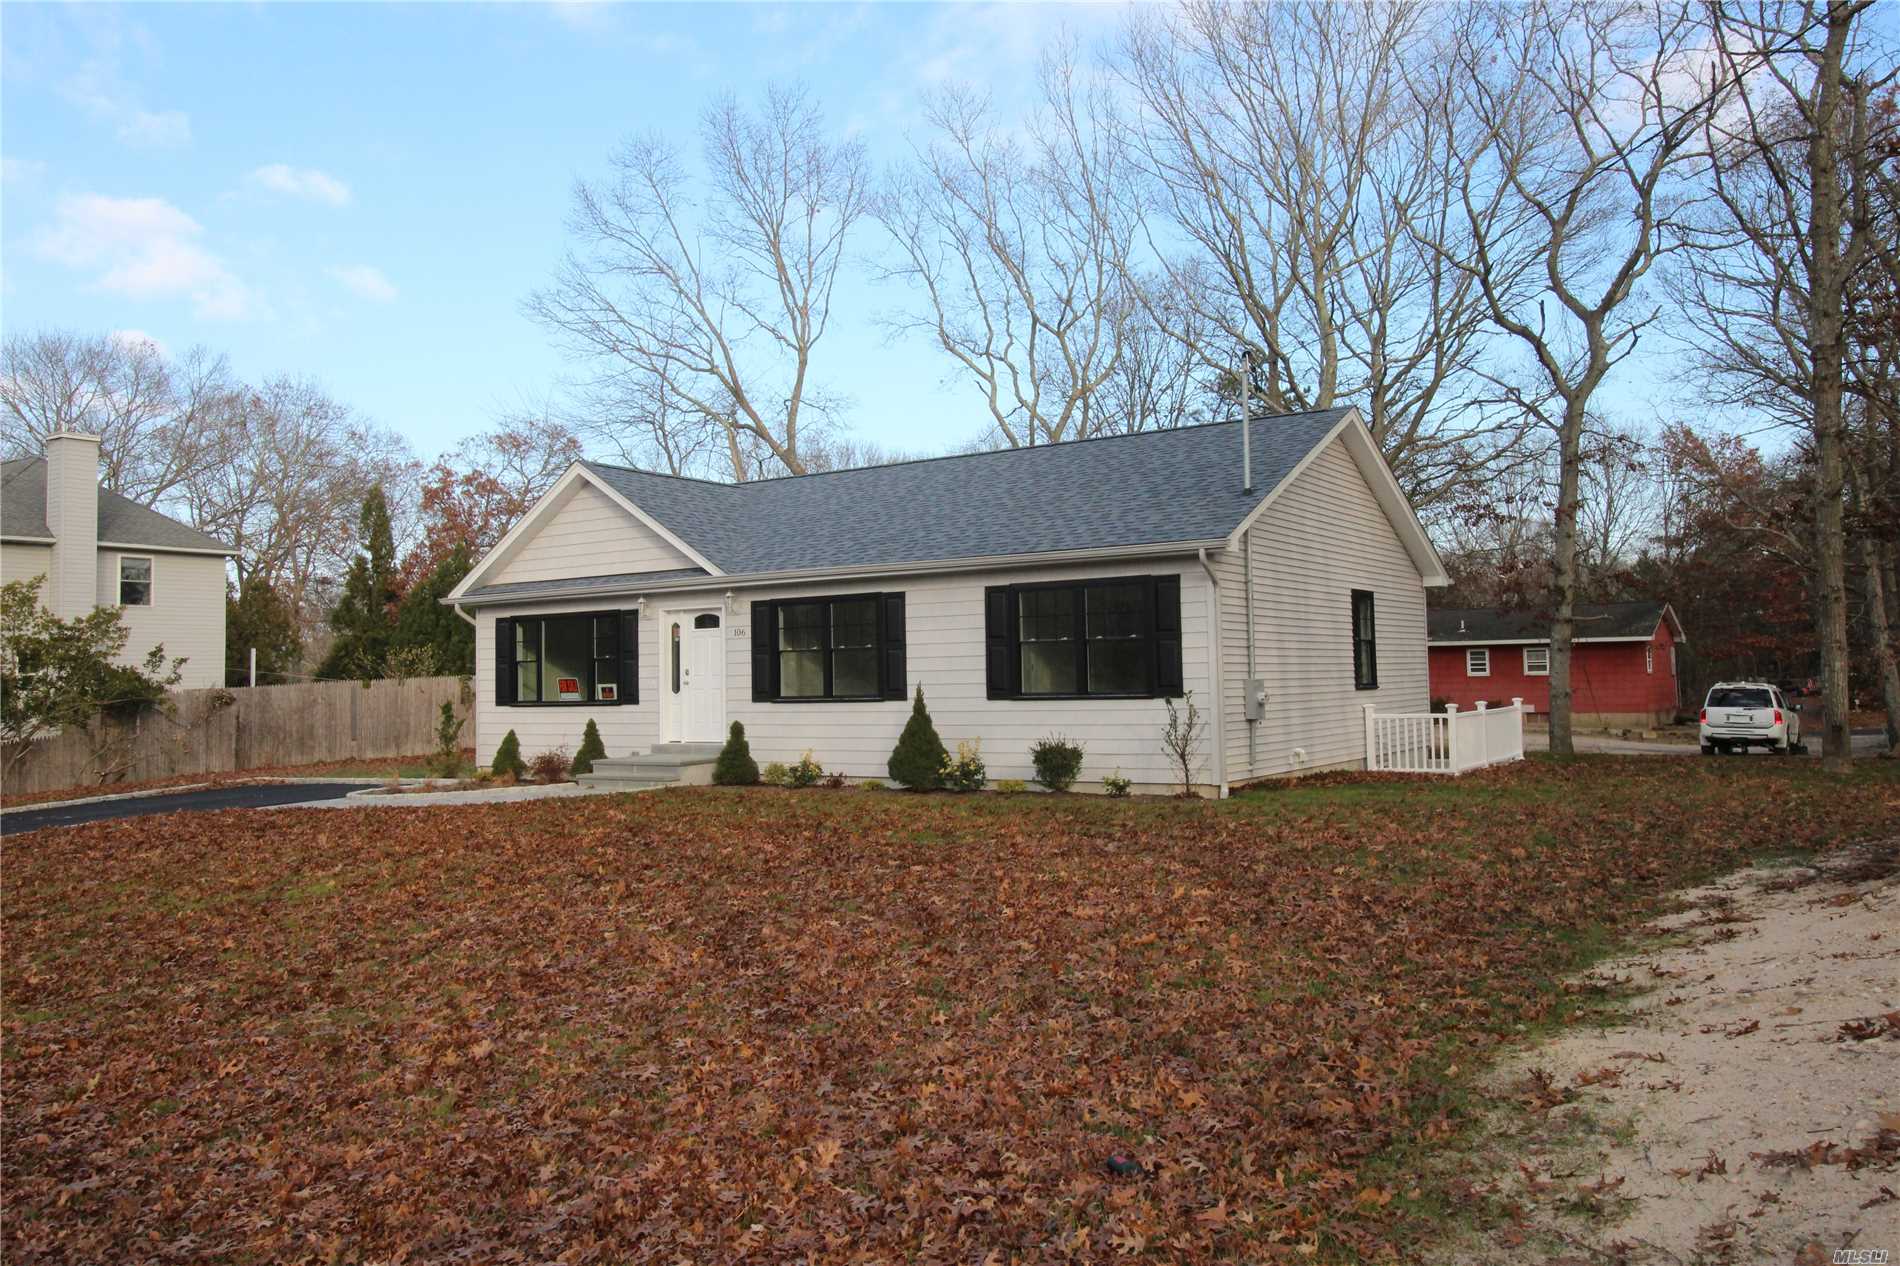 Listing in Flanders, NY